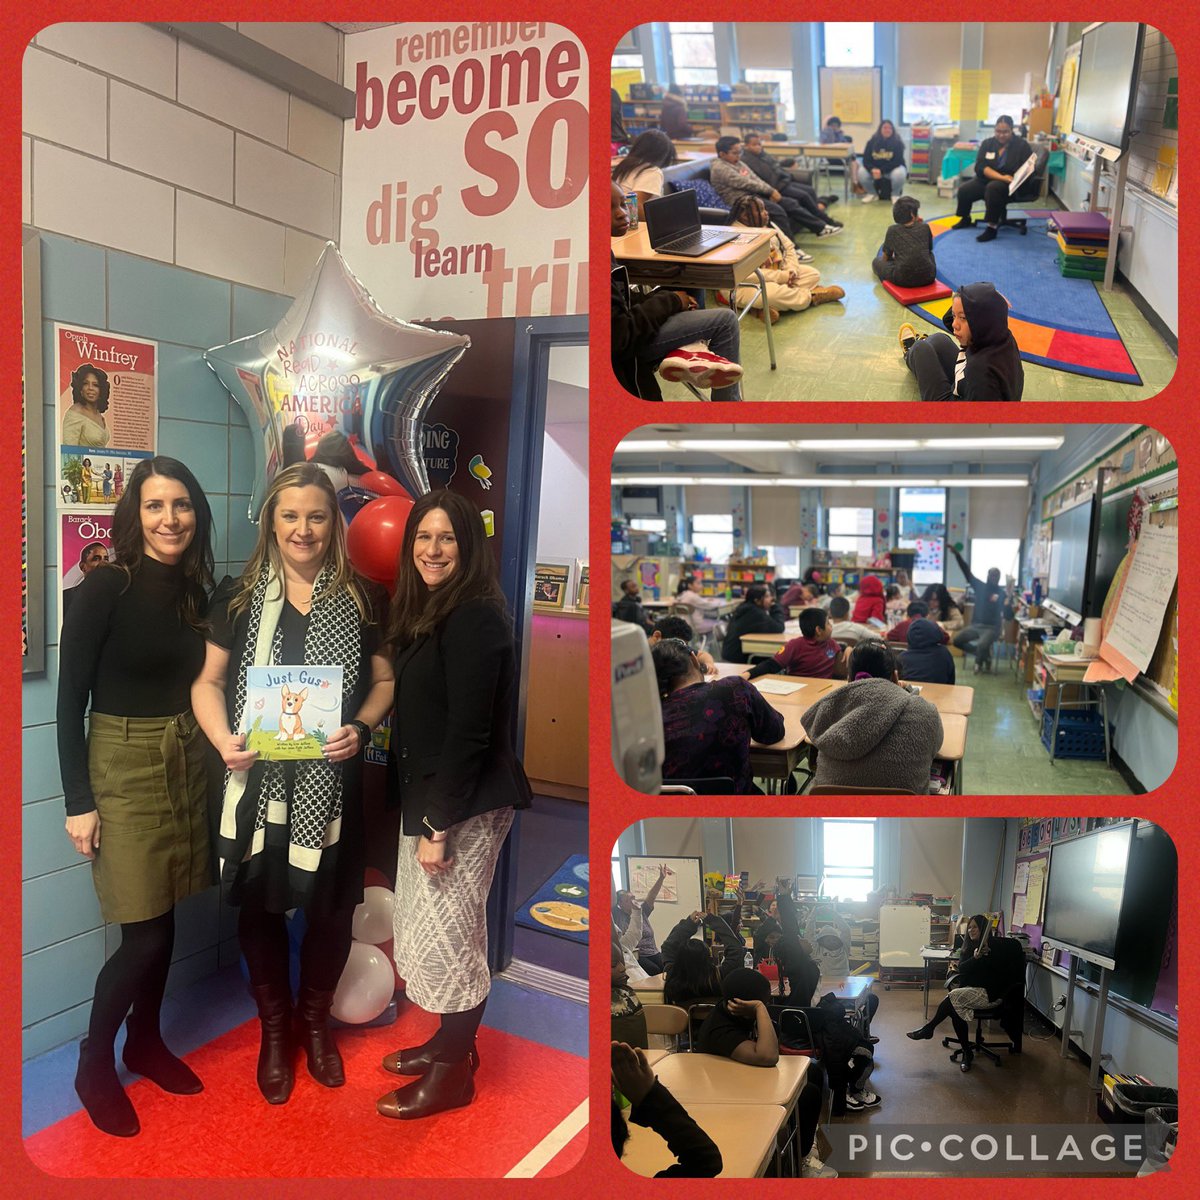 Such a beautiful day @PS16School for World Read Aloud Day! So grateful for the support of our guest readers! Our babies loved their time with you!! @BobbyDigi @JPatanio @StatenIslandDA @jess_scarcella Thank YOU! @sleepyhd16